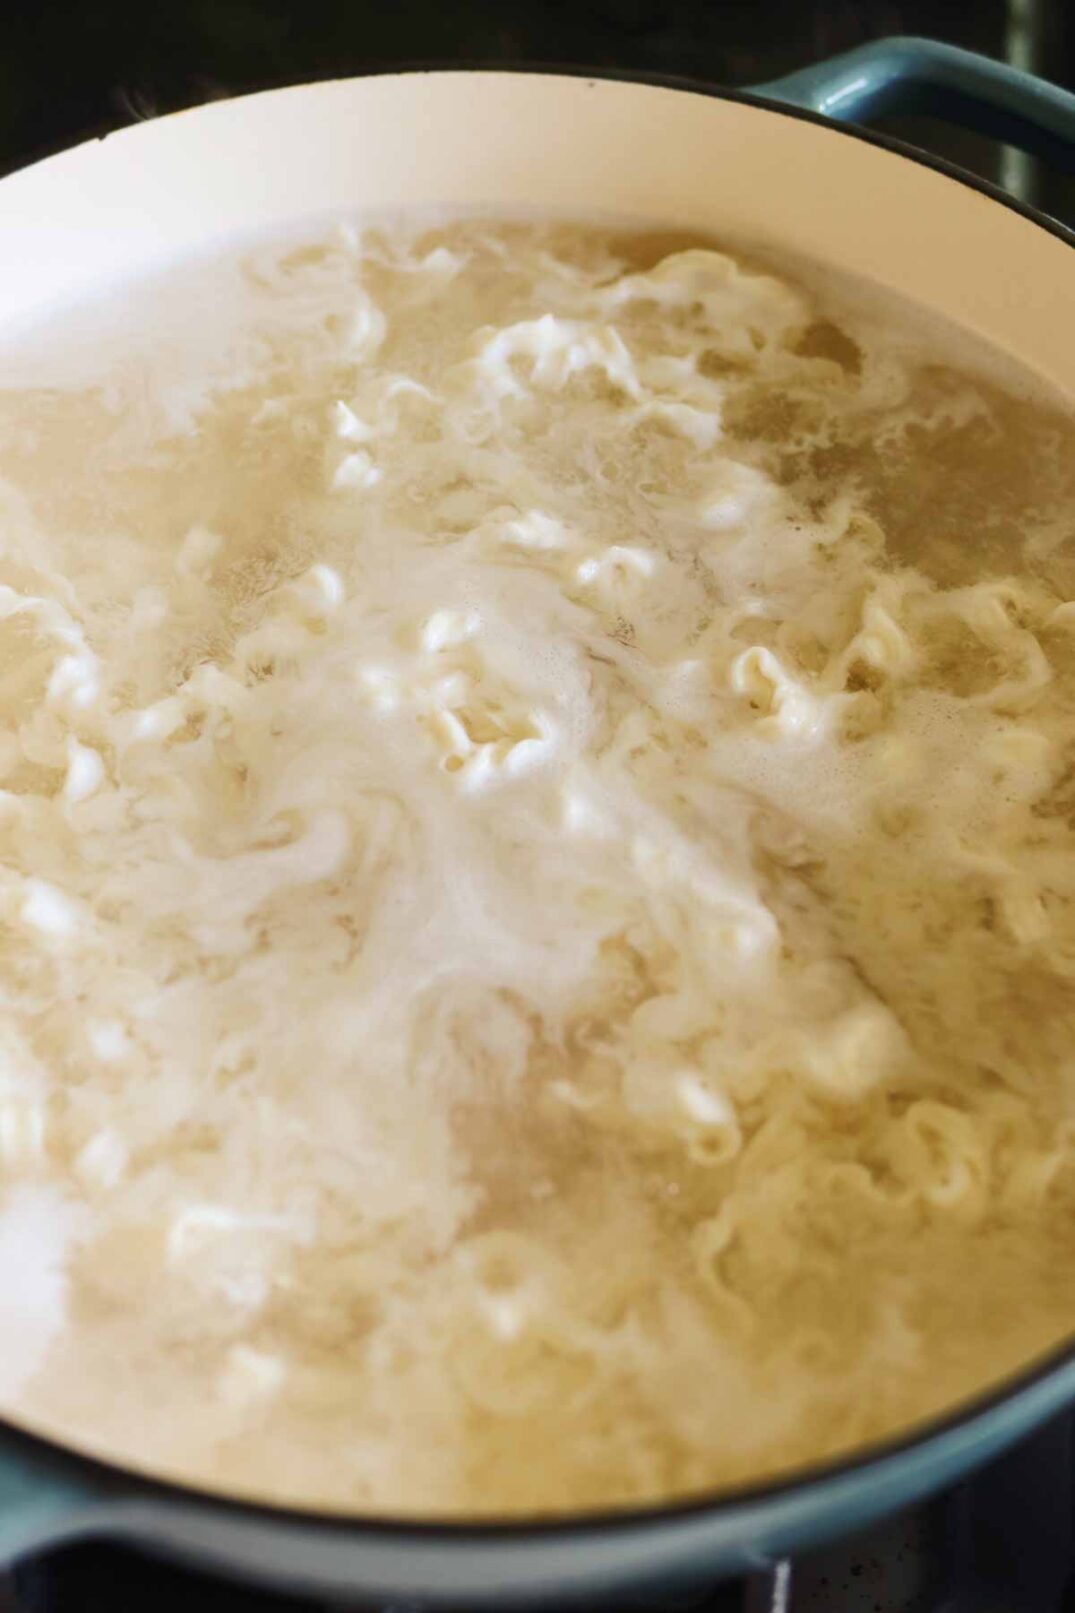 trader joe's squiggly noodles cooking in water.